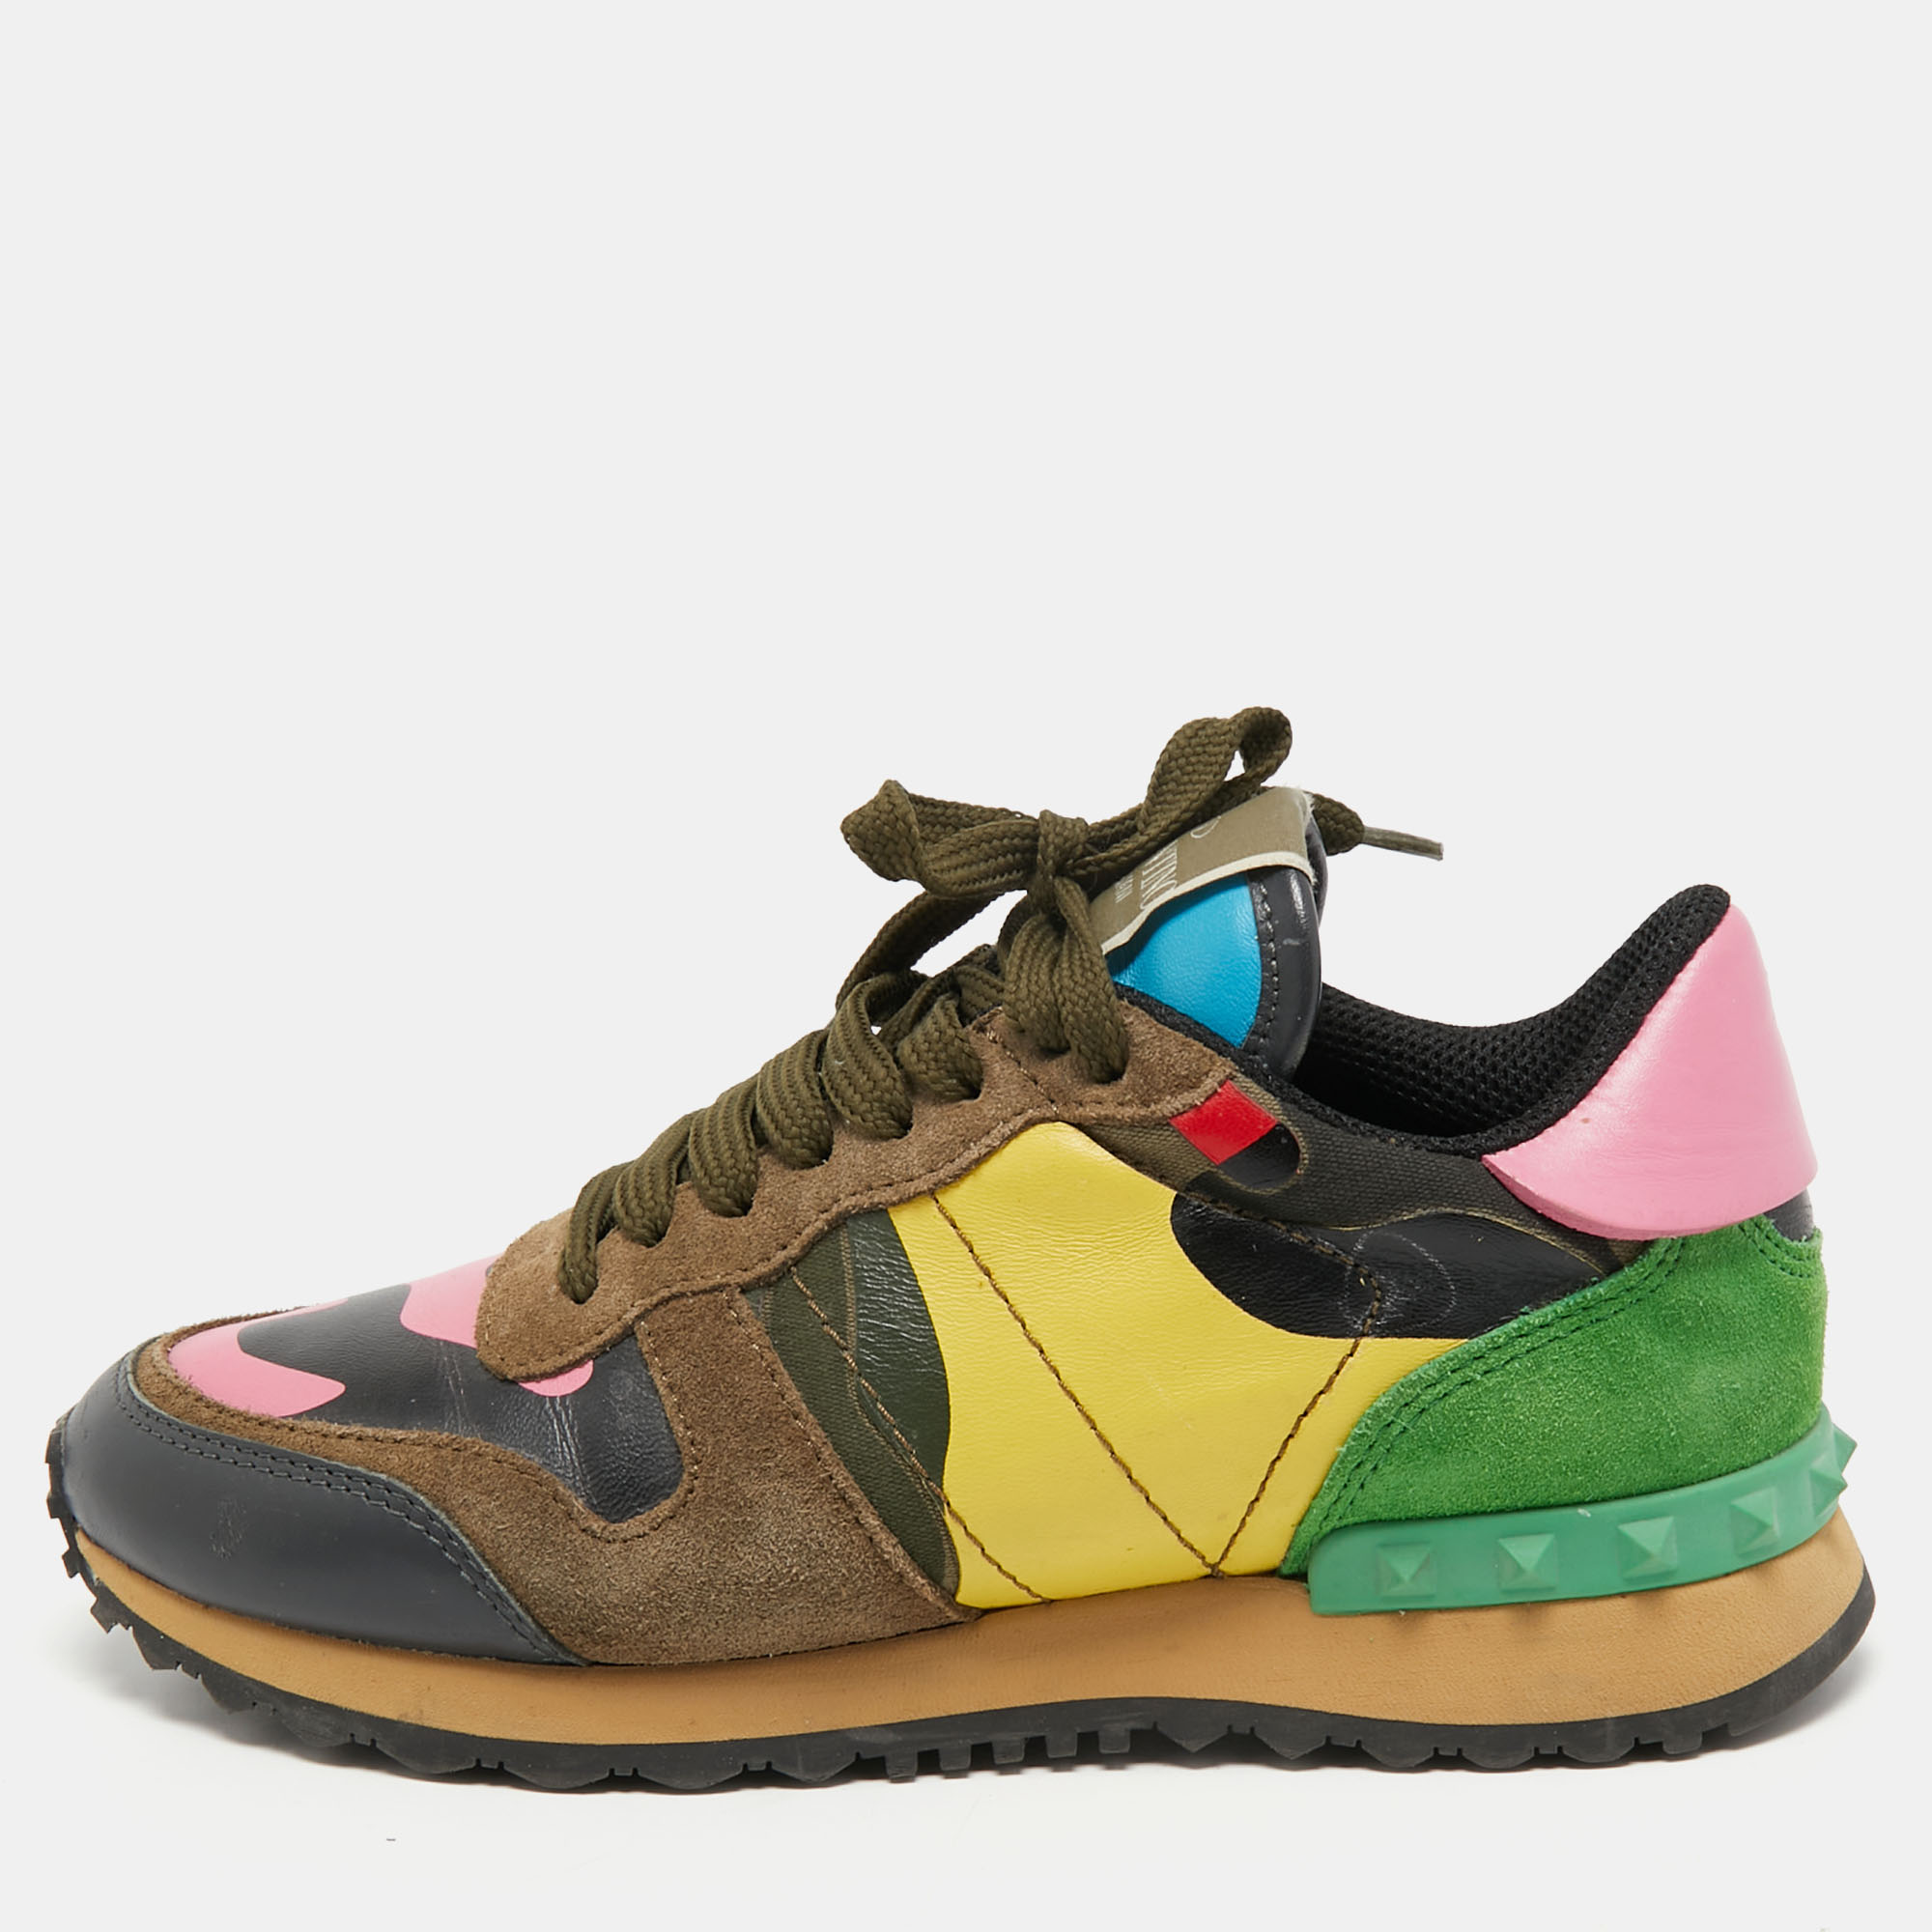 Valentino Multicolor Suede, Camo Print Leather And Canvas Rockrunner Sneakers Size 35.5